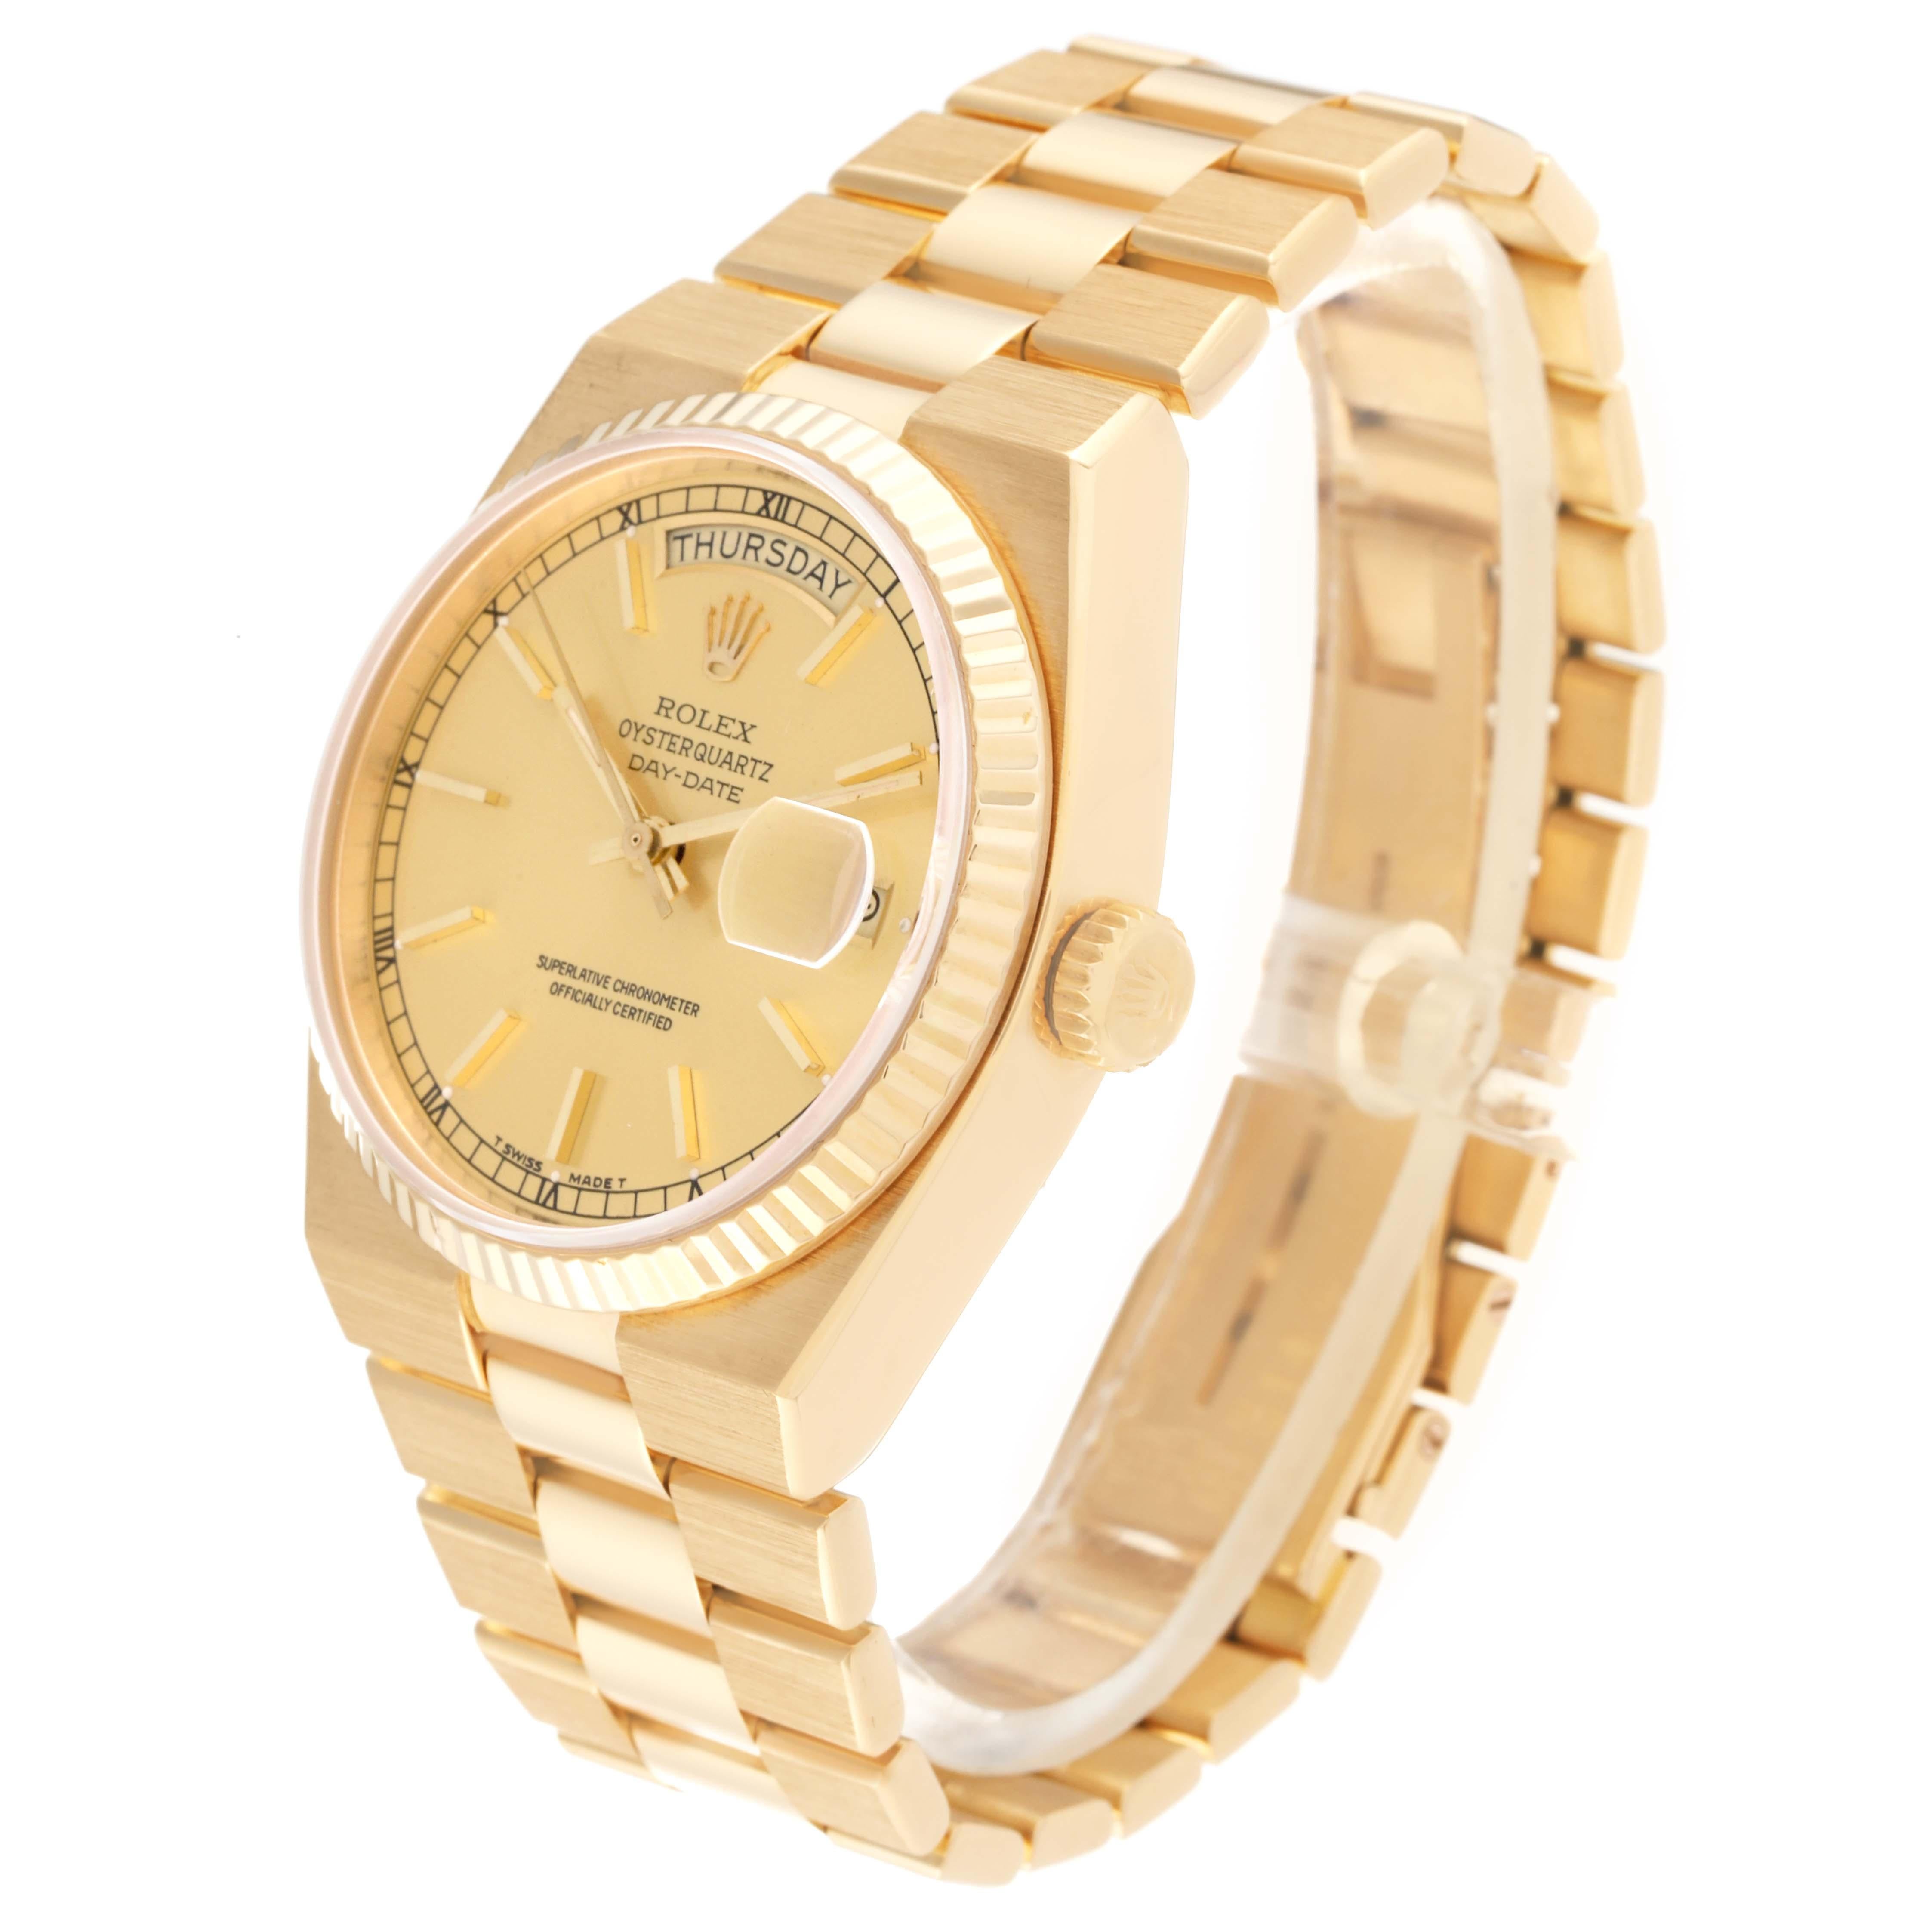 Rolex Oysterquartz President Day-Date Yellow Gold Mens Watch 19018 For Sale 2